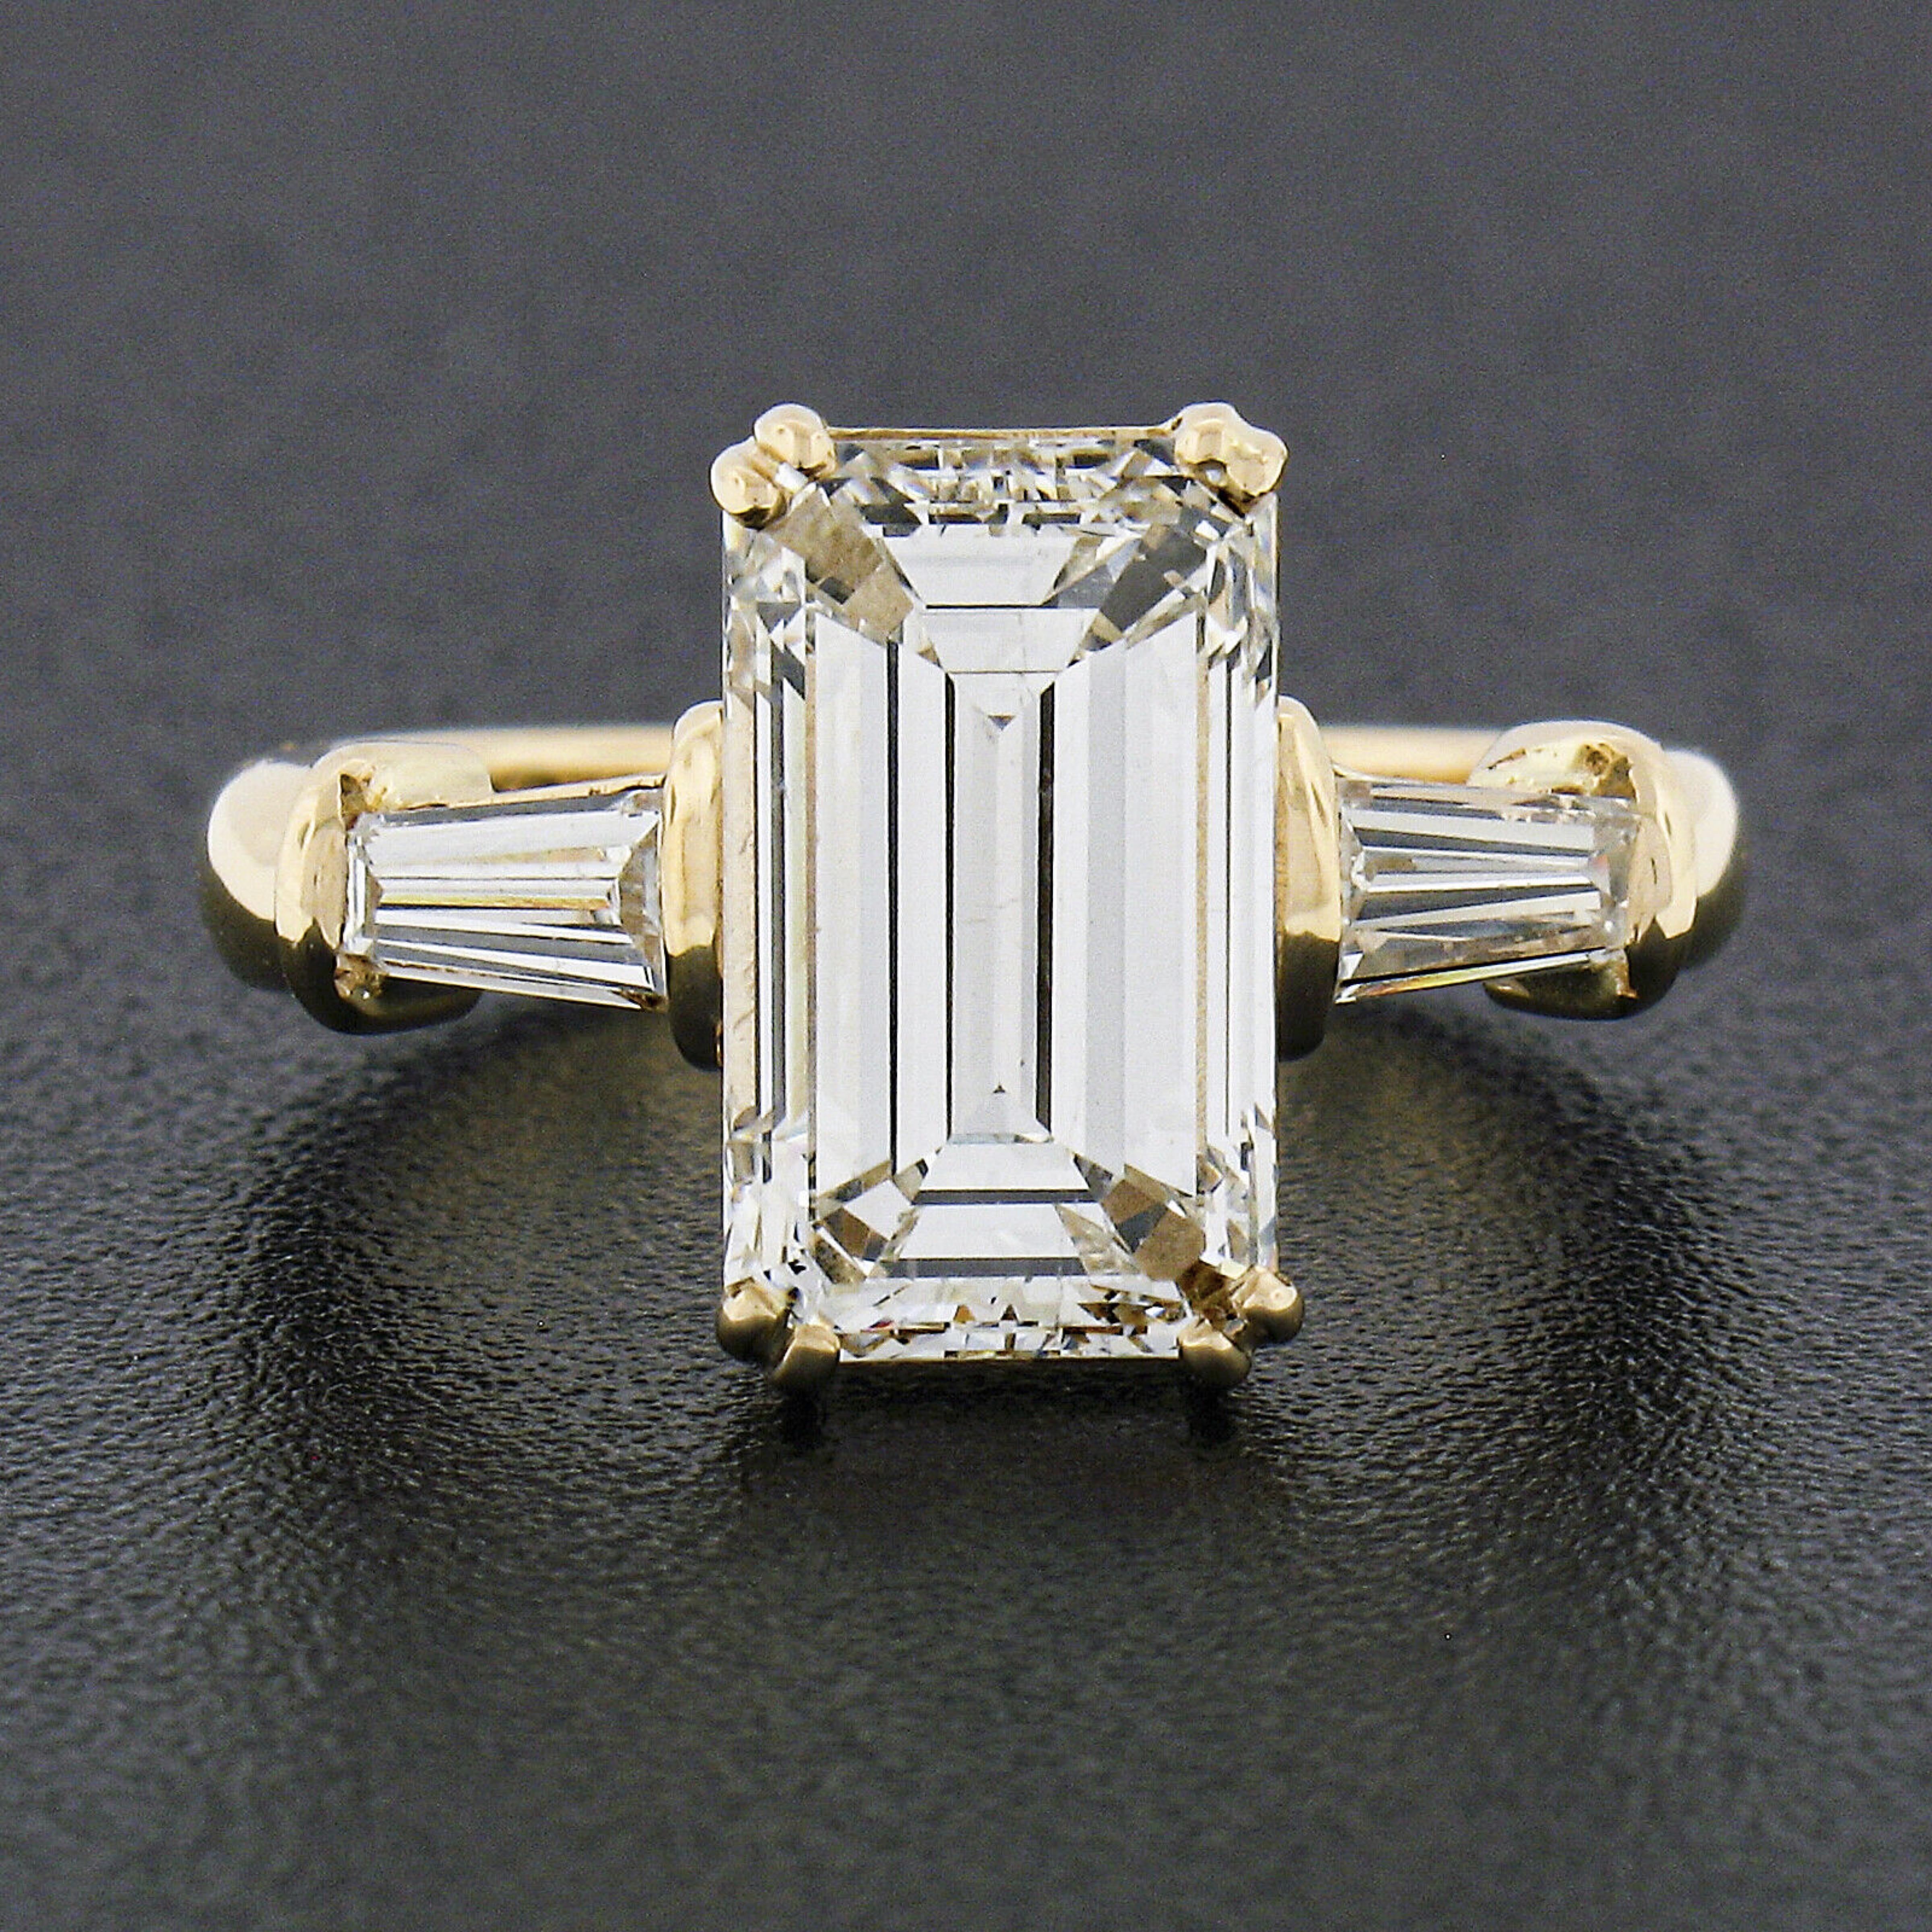 You are looking at a truly magnificent and very well made engagement style ring that was crafted from solid 18k yellow. It features an absolutely breathtaking, GIA certified, unique elongated emerald cut diamond solitaire neatly set with dual wire